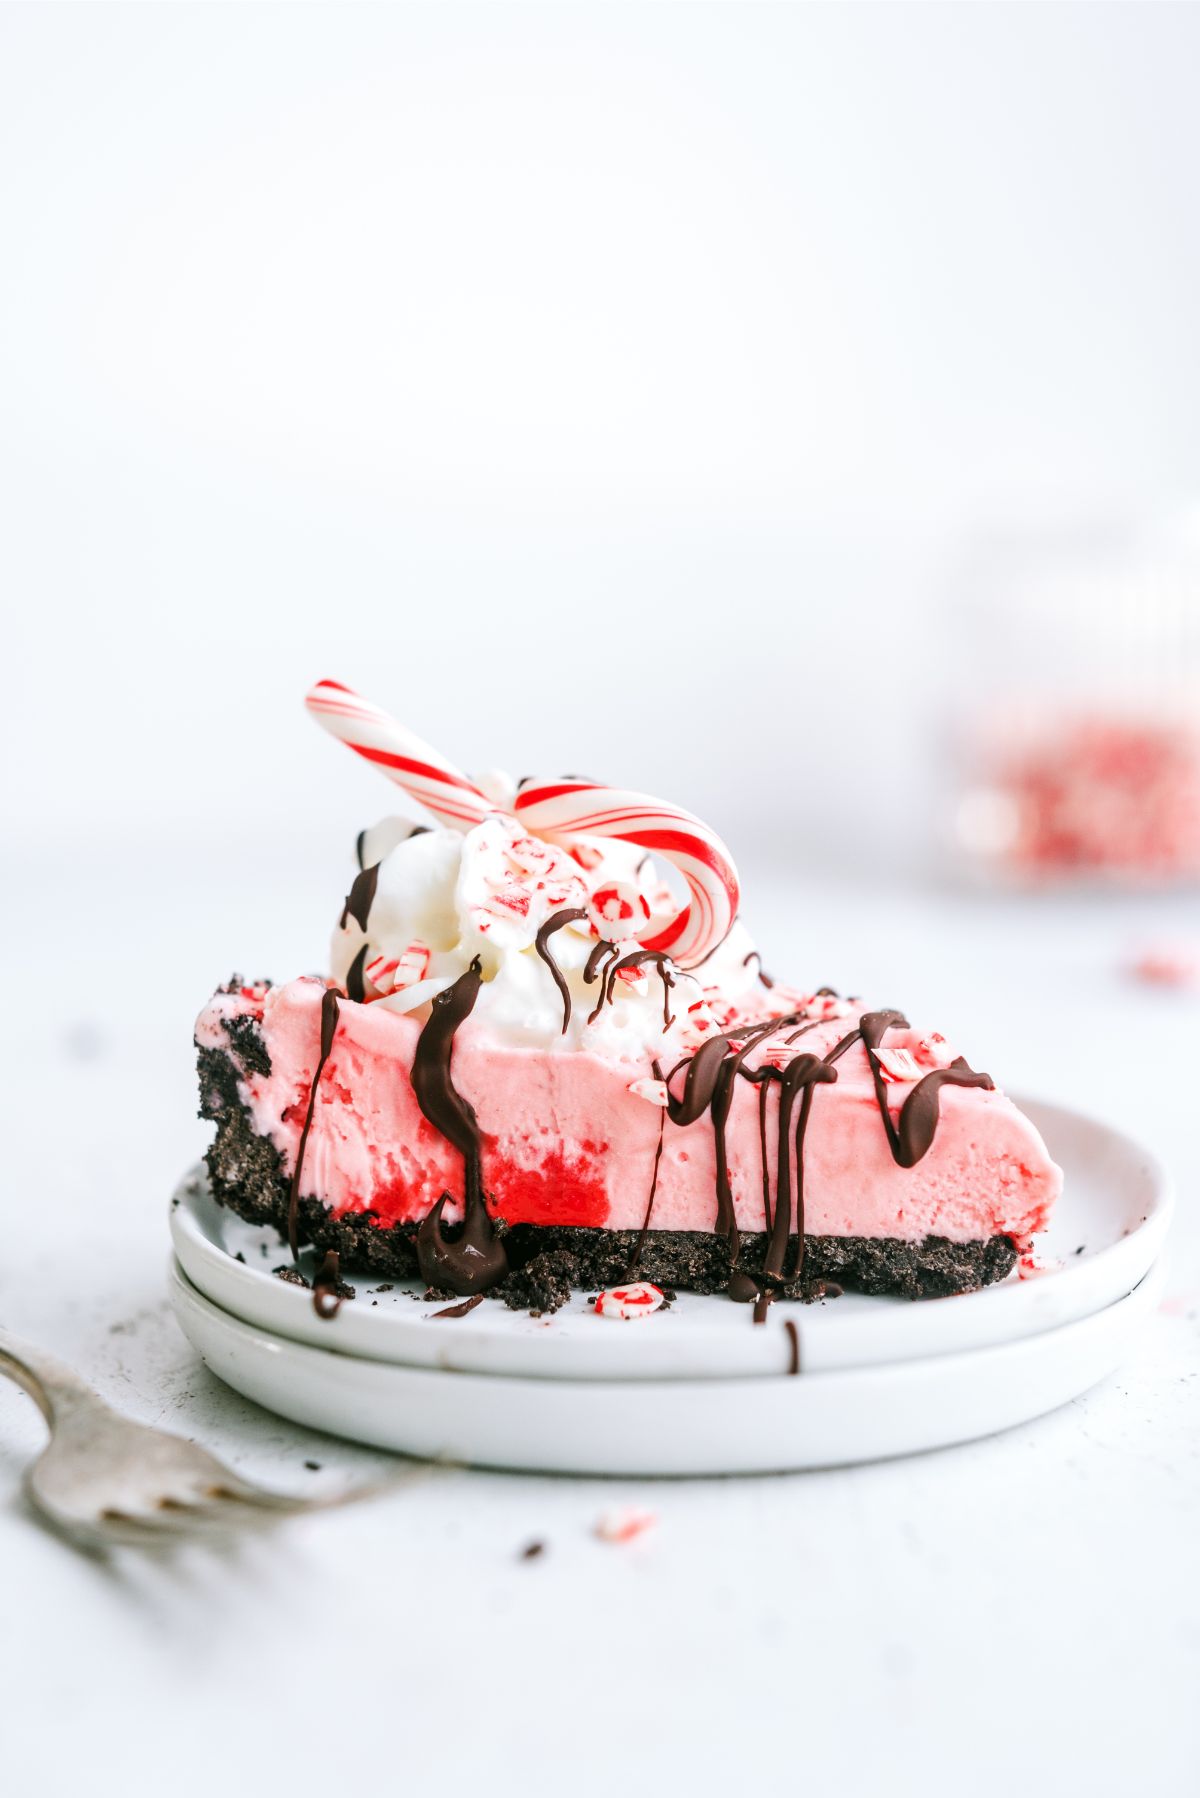 A slice of Peppermint Crunch Ice Cream Pie on a plate